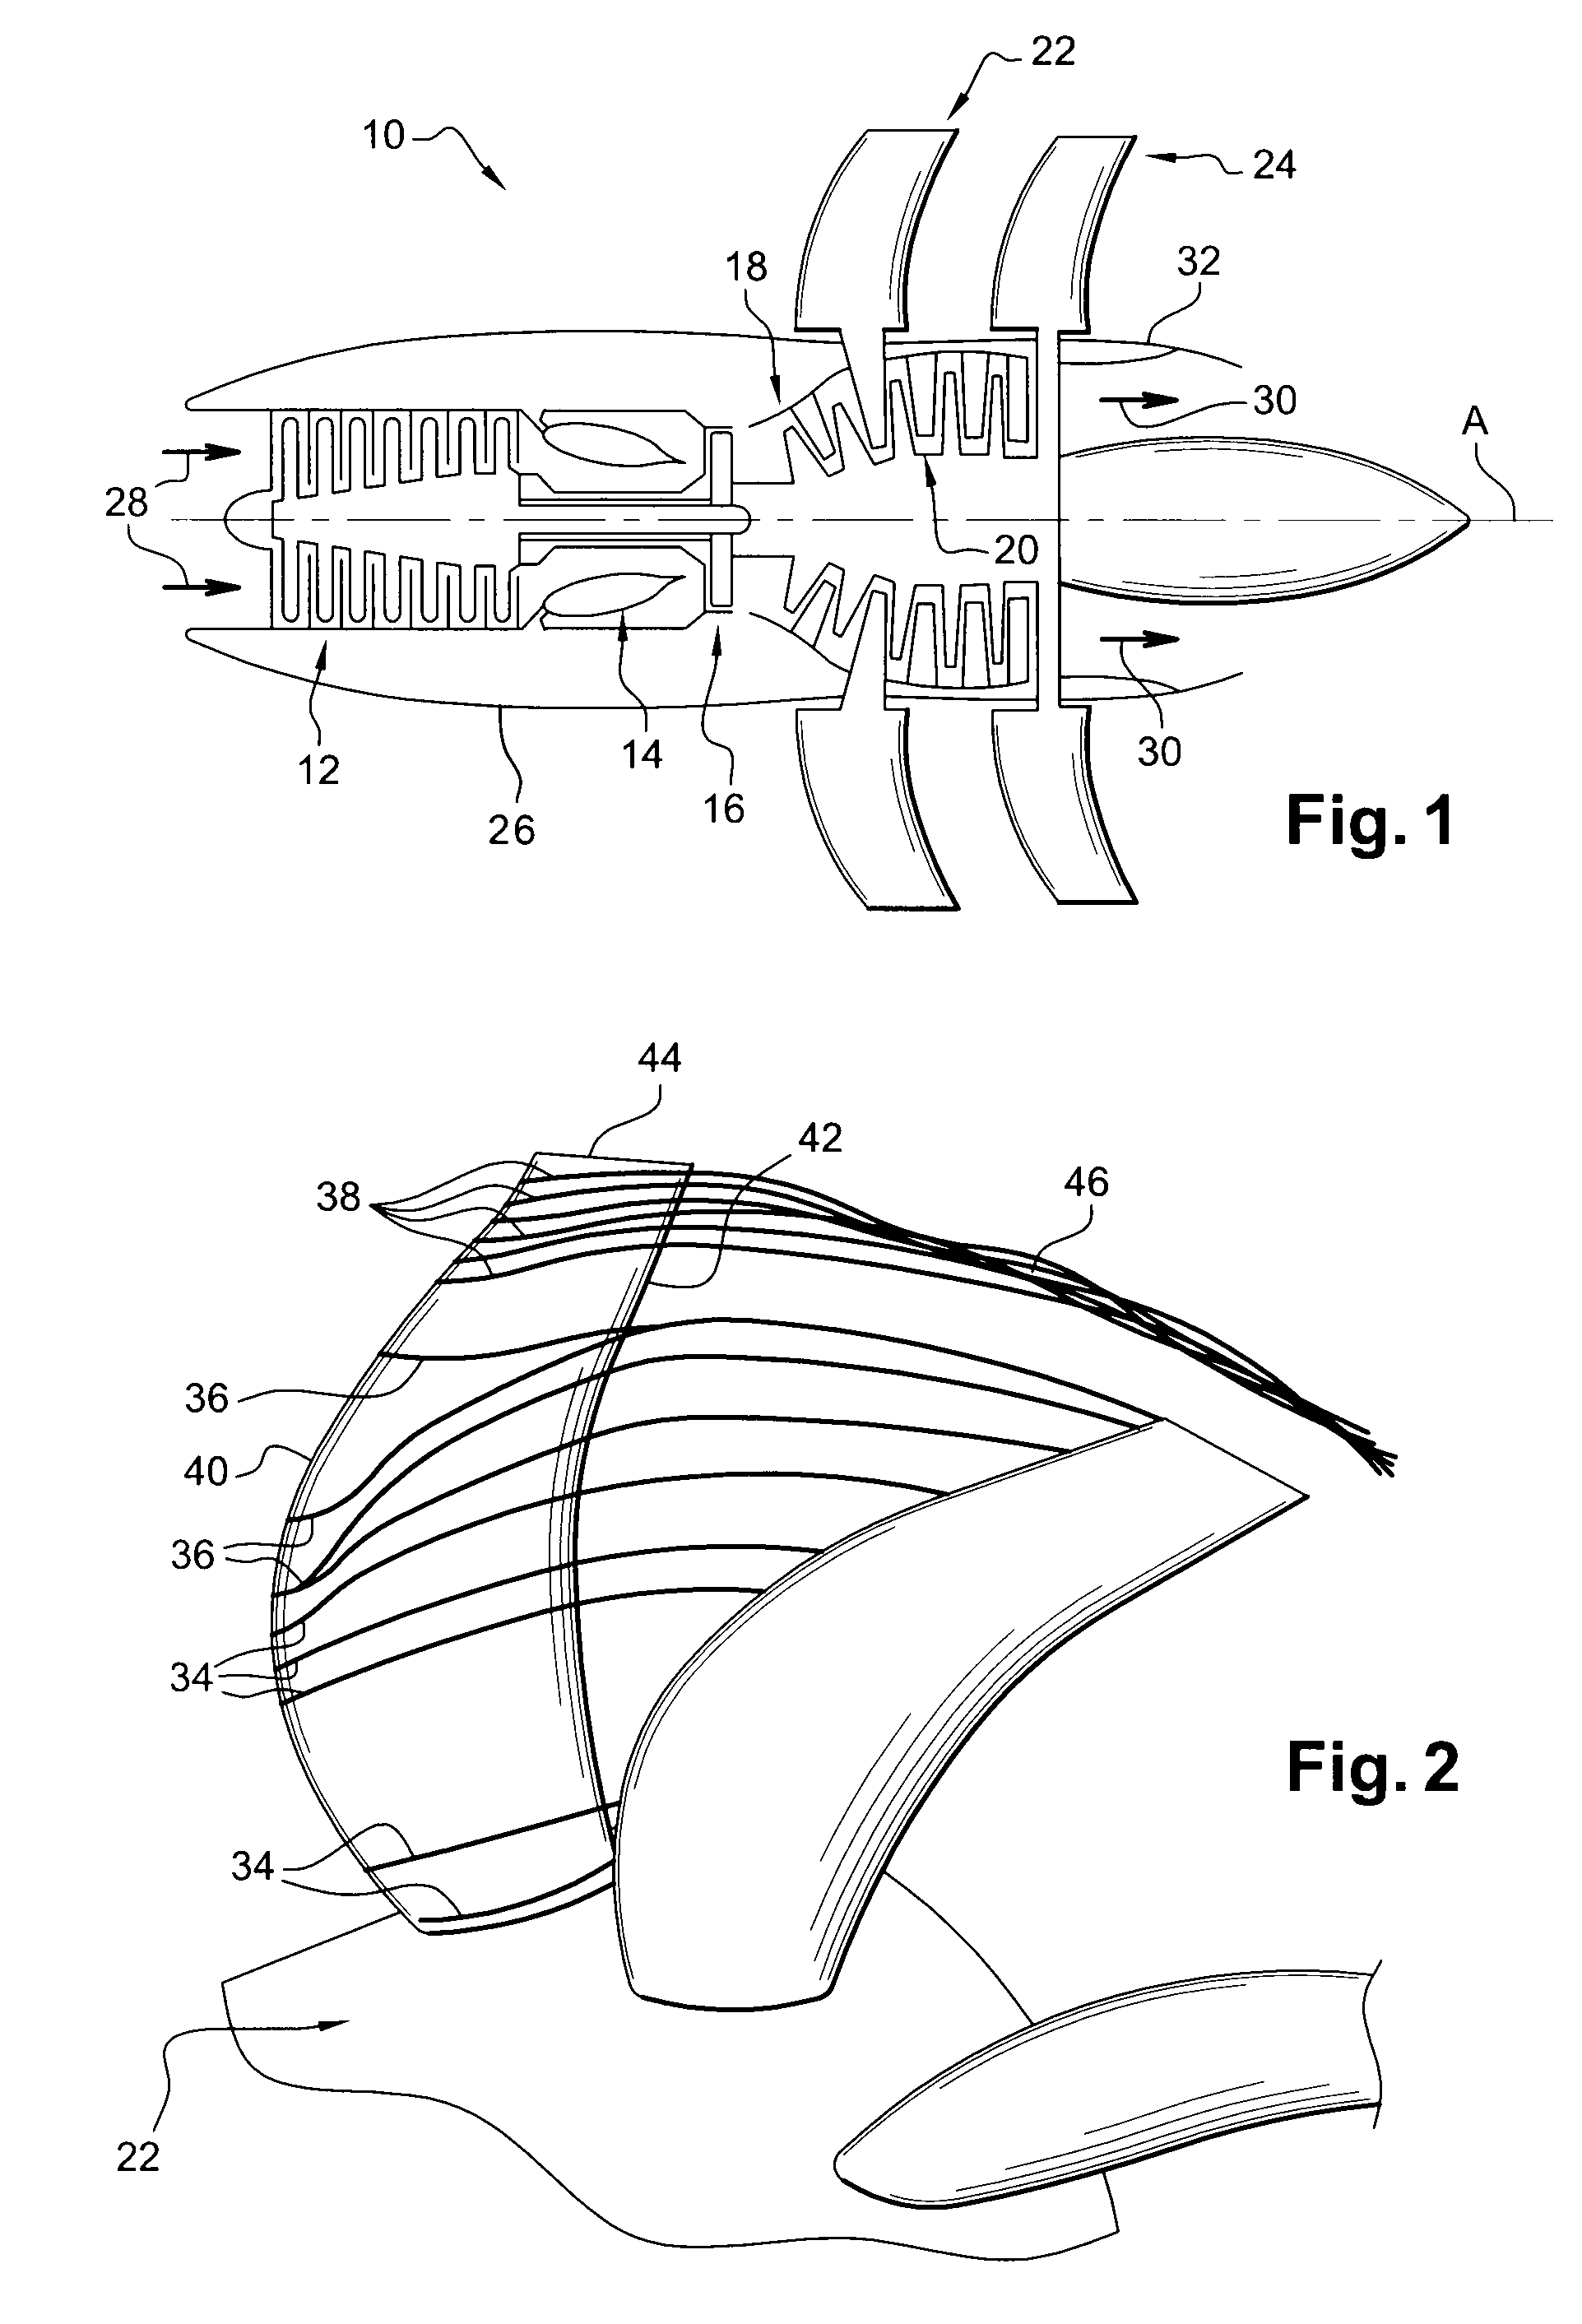 Turbomachine having an unducted fan provided with air guide means